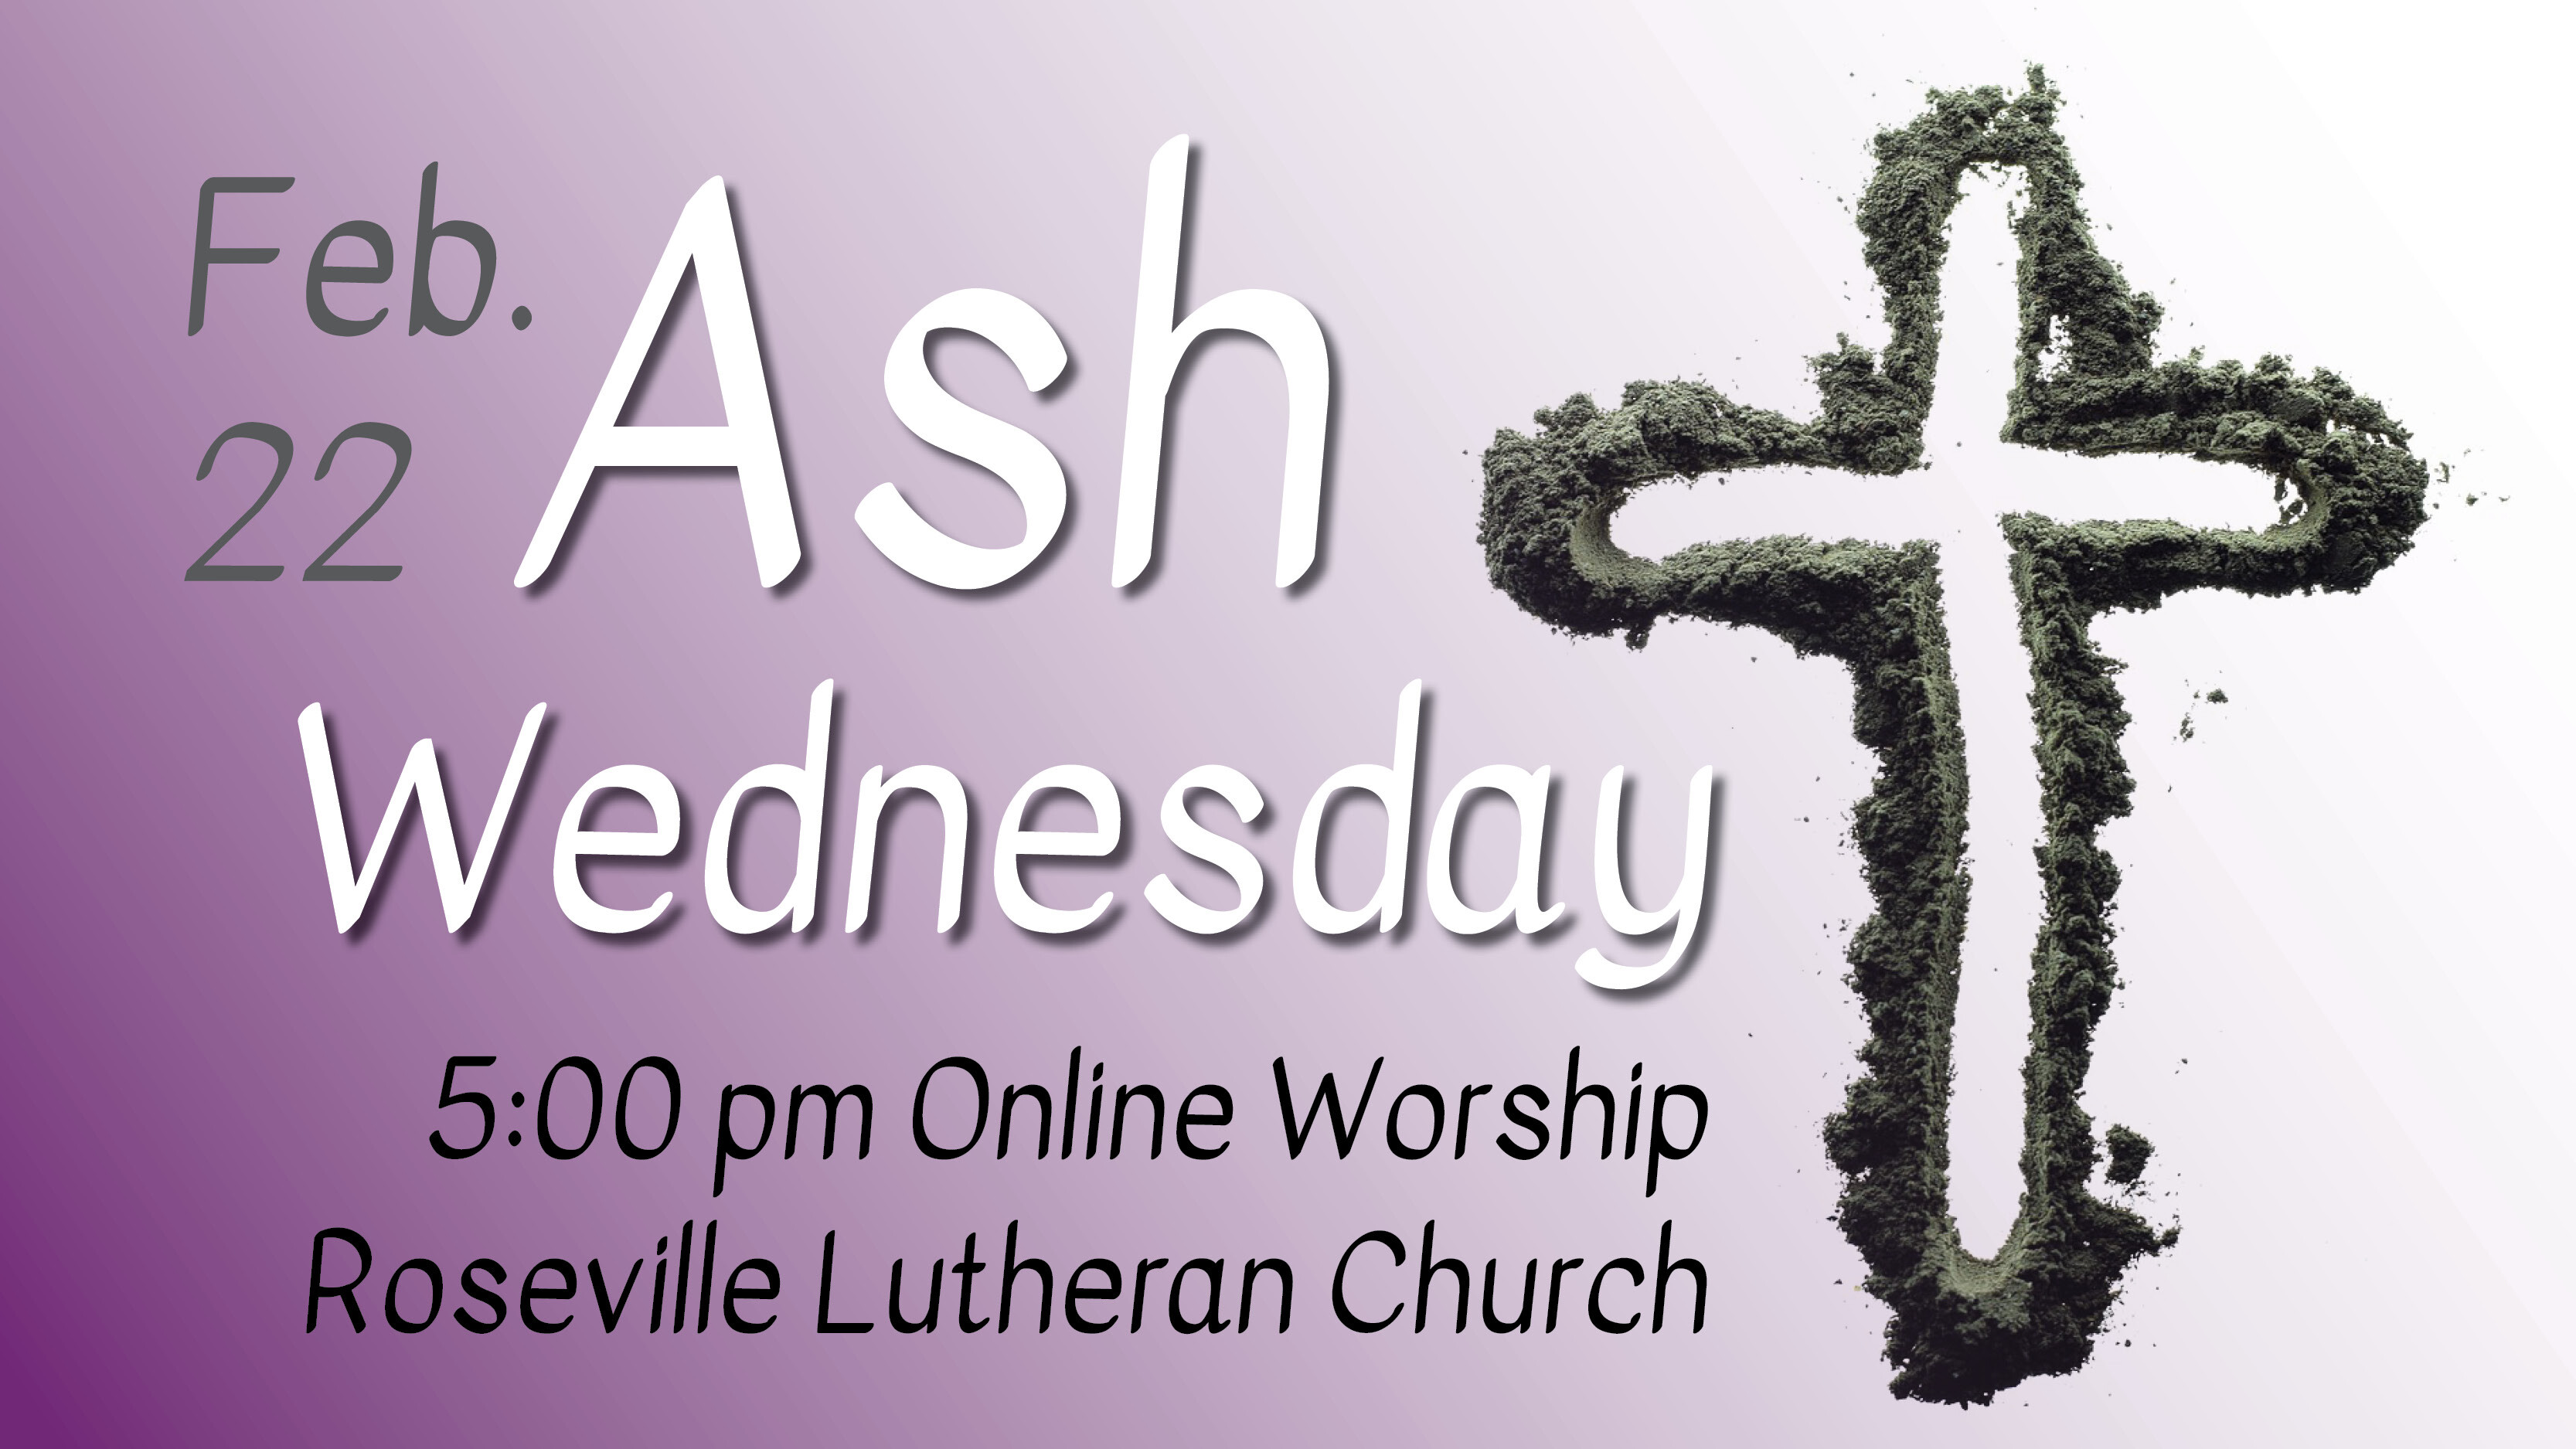 Wednesday Worship - March 1, 2023